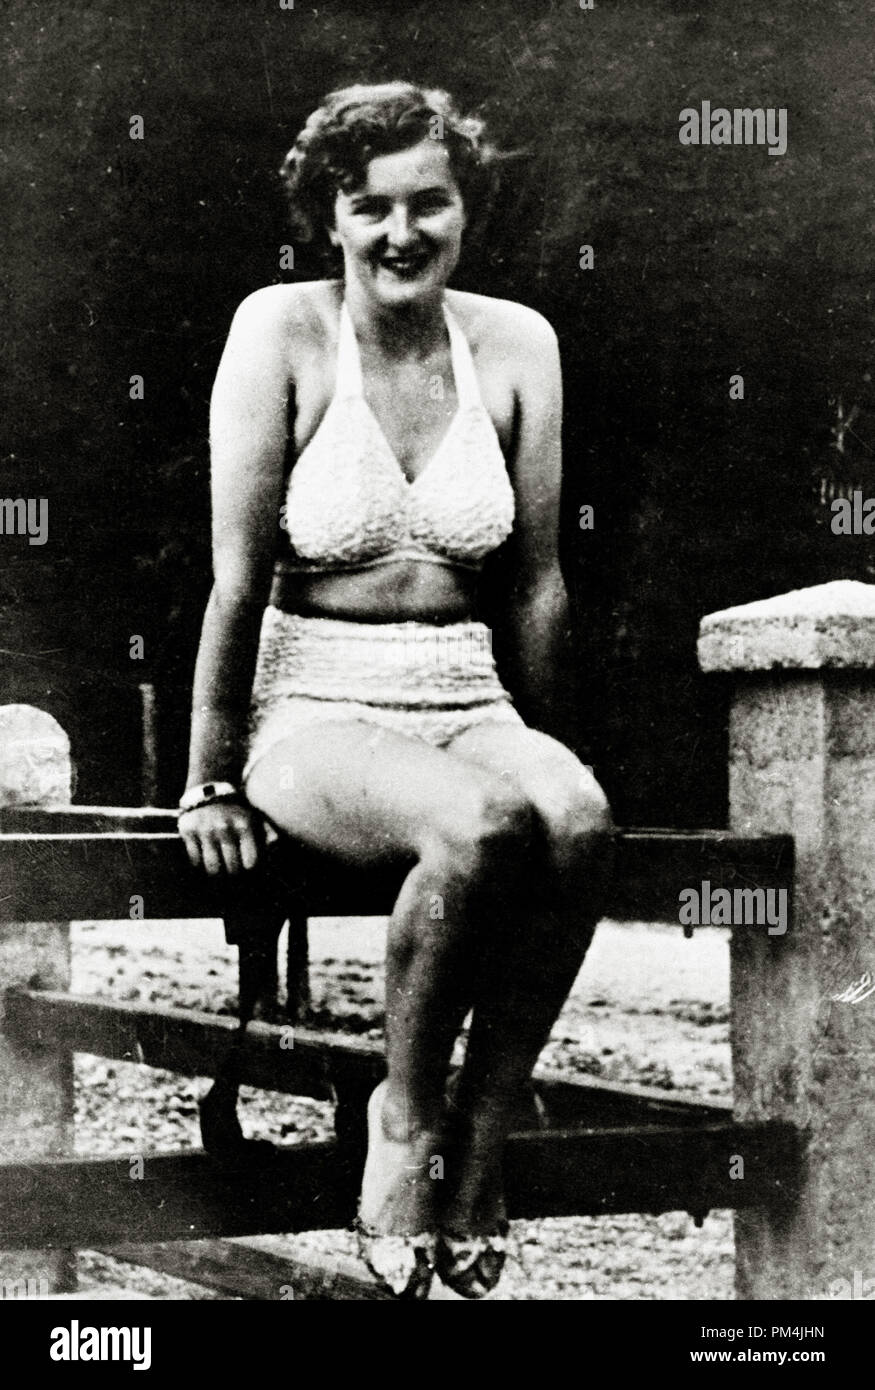 Eva Braun, Adolf Hitler's mistress/wife, in a swimsuit, circa 1938.   File Reference # 1003 781THA Stock Photo